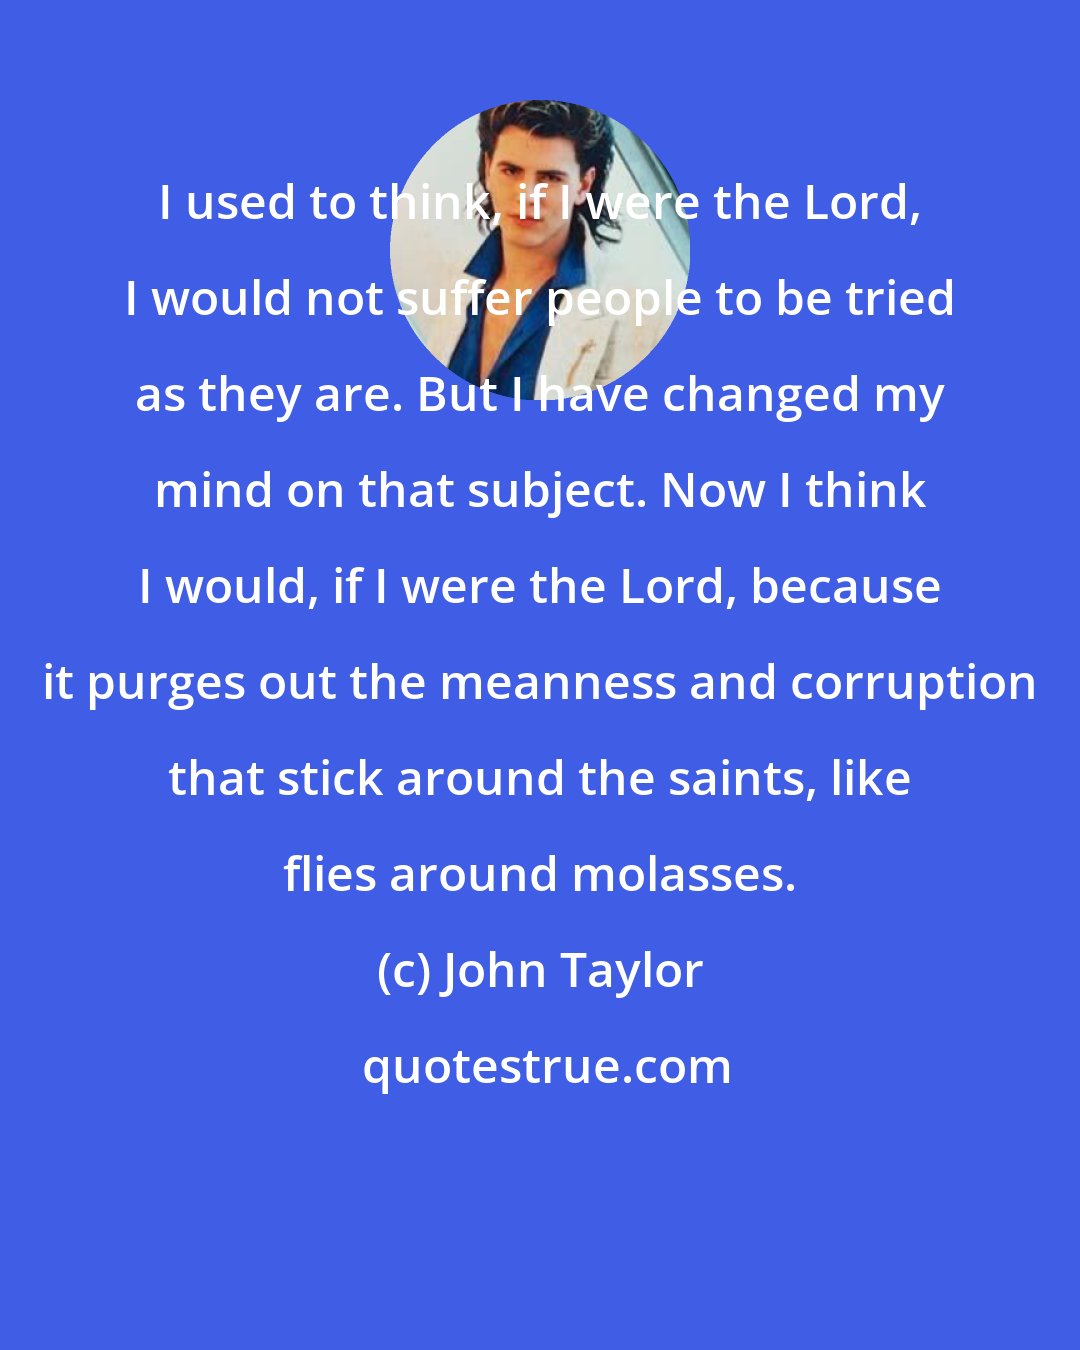 John Taylor: I used to think, if I were the Lord, I would not suffer people to be tried as they are. But I have changed my mind on that subject. Now I think I would, if I were the Lord, because it purges out the meanness and corruption that stick around the saints, like flies around molasses.